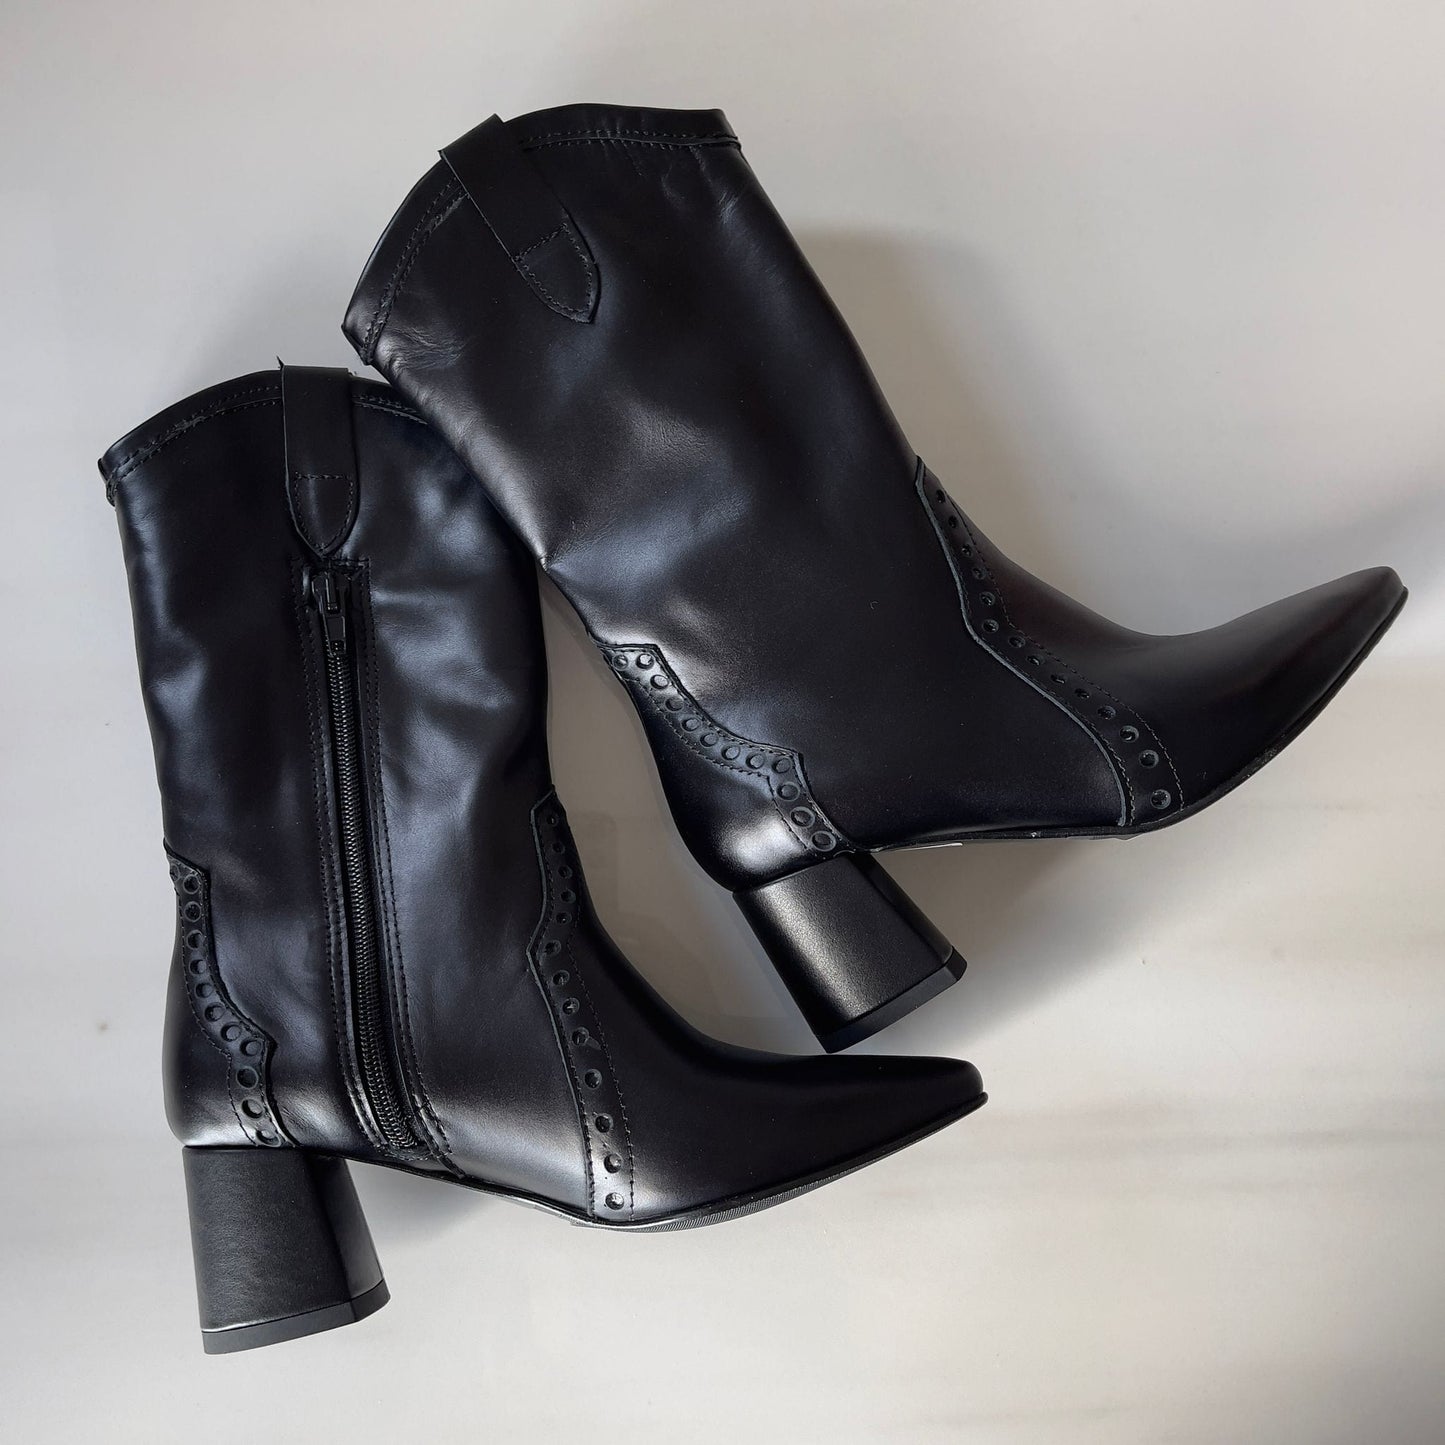 Black leather pointed toe ladies western boots